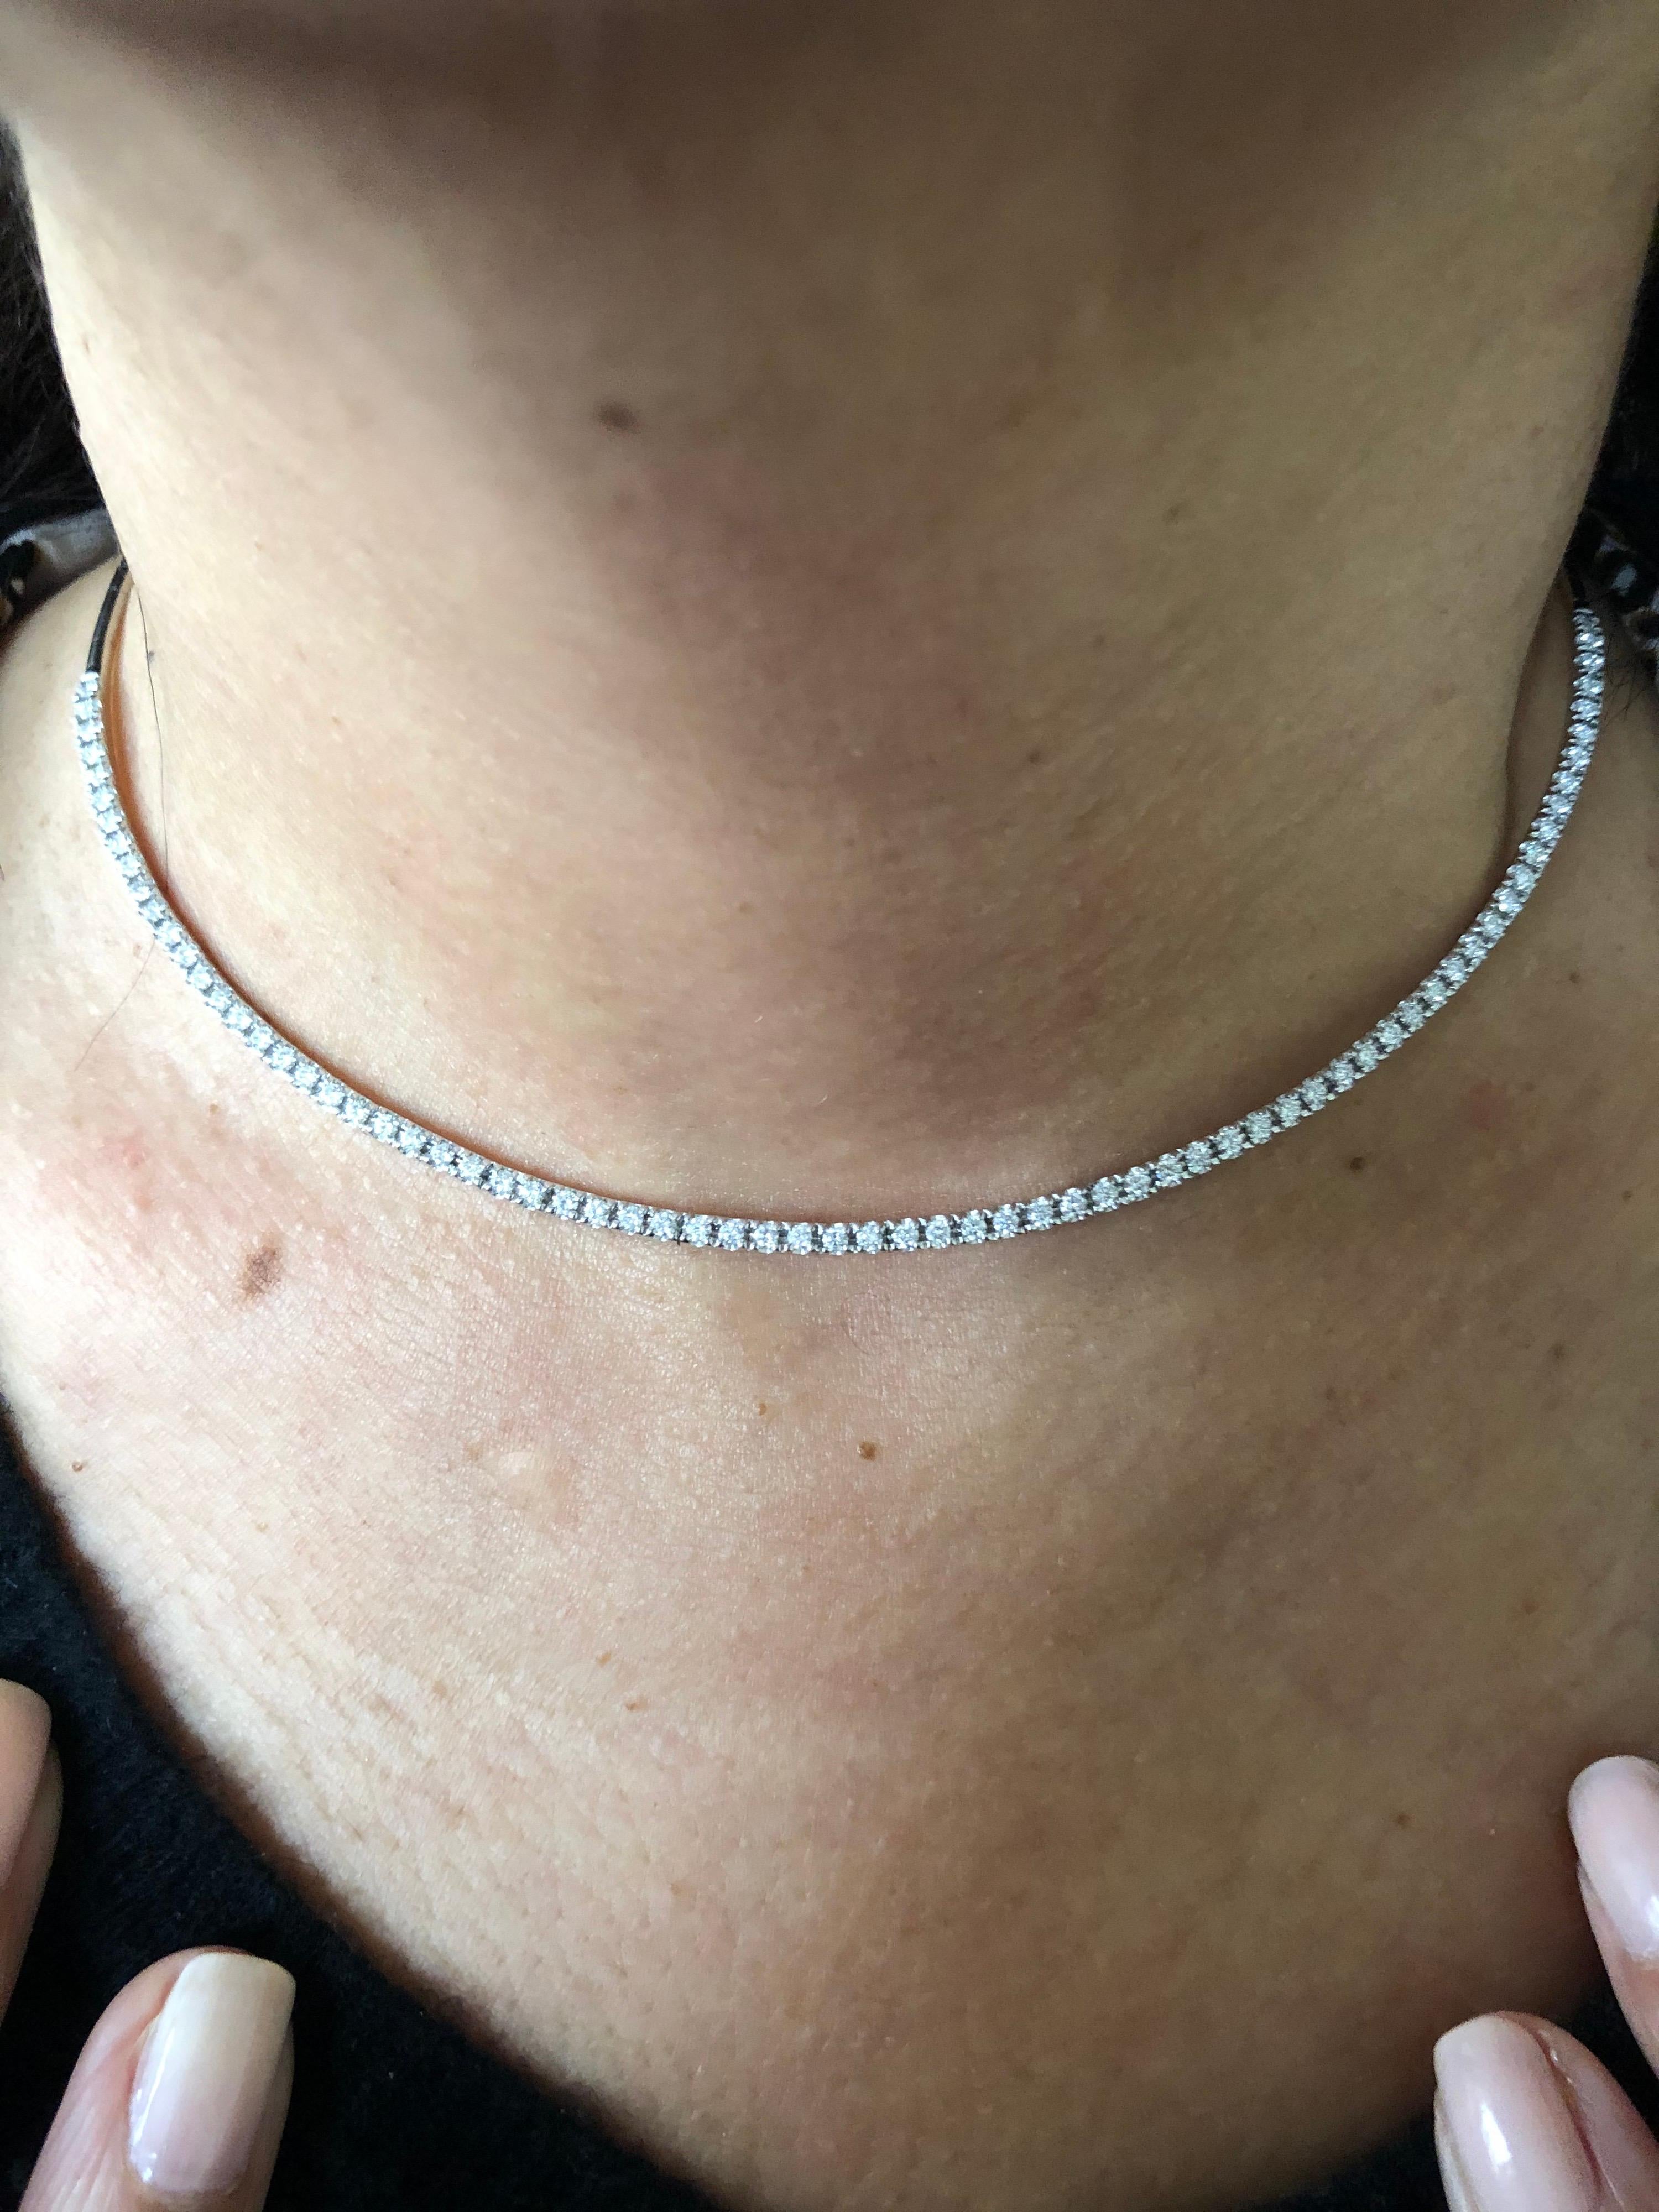 Choker necklace set in 14K white gold. The choker necklace is a rigid style and the diamonds are set half-way. The total carat weight of the necklace is 2.16 carats. The stones are G, the clarity is SI1-SI2. The necklace is available in yellow gold.